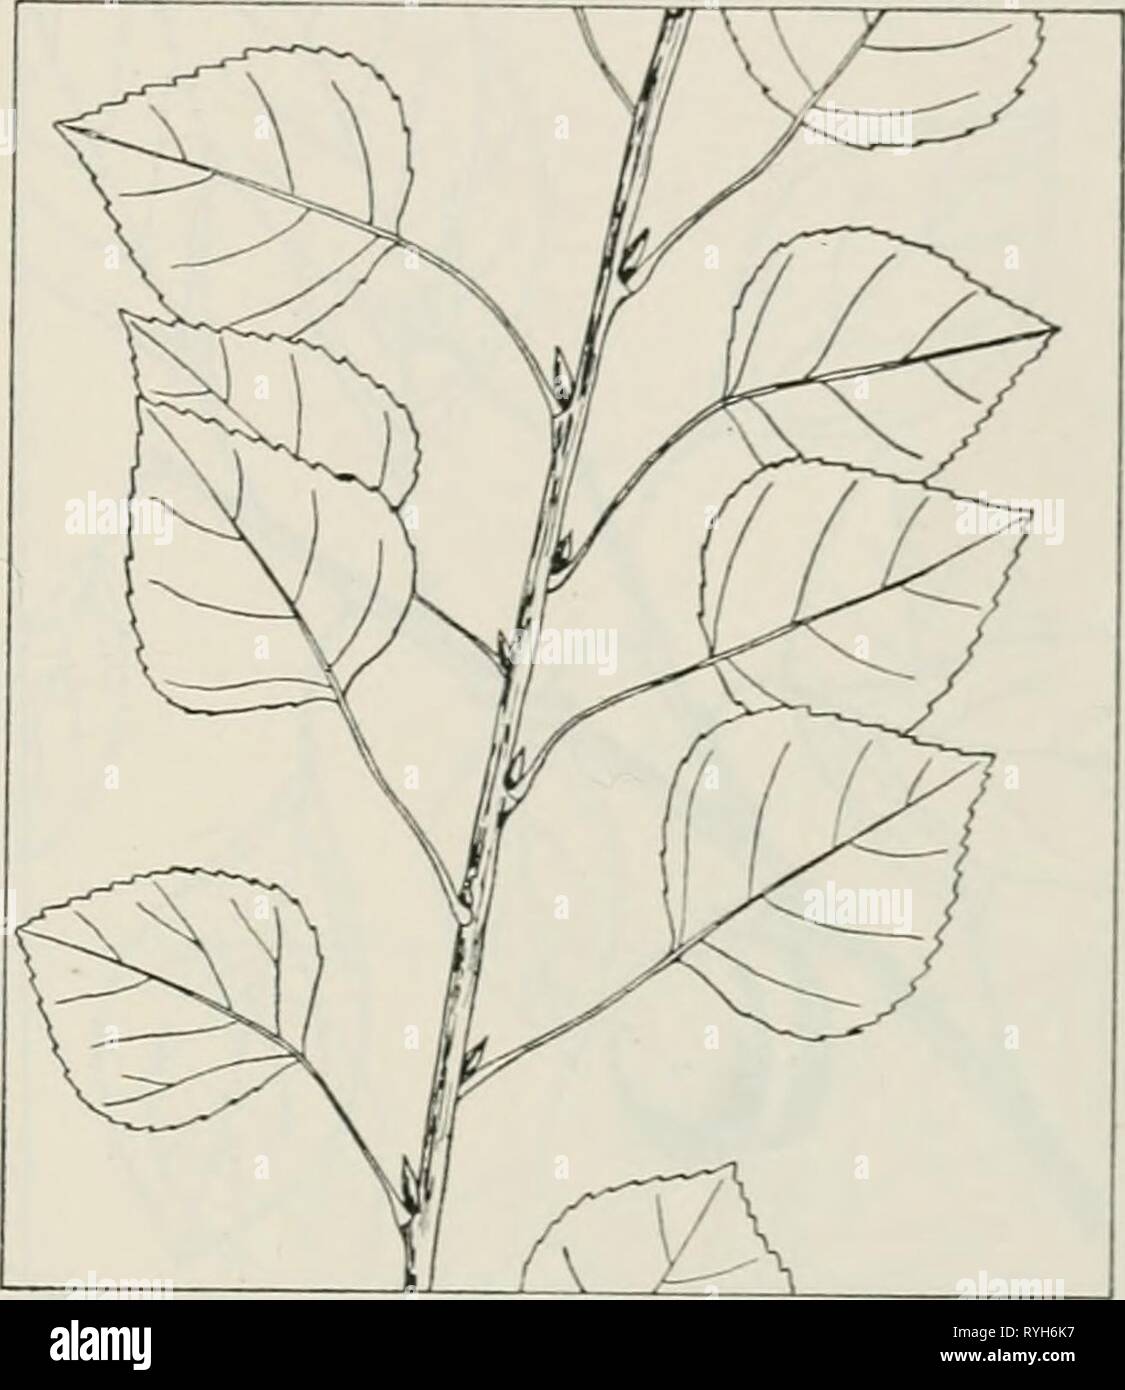 The drug plants of Illinois  drugplantsofilli44teho Year: 1951  Tehon THE DRUG PLANTS OF ILLINOIS 91 POPULUS GANDIGANS Ait. Balm of Gilead. Salicaceae. The buds are collected. Planted oc- casionally as an ornamental tree. Contains an aromatic, volatile oil, a balsamic resin, and salicin. Used as a tonic, stimulant, and expectorant; used formerly in ointments to prevent their becoming rancid. POPULUS TREMULOIDES Michx. Trembling aspen, aspen, white poplar. Salicaceae.—A small, open, round-topped tree with slender branches drooping at the tips, 30 to 60 feet tall; bark of the trunk black, fissur Stock Photo